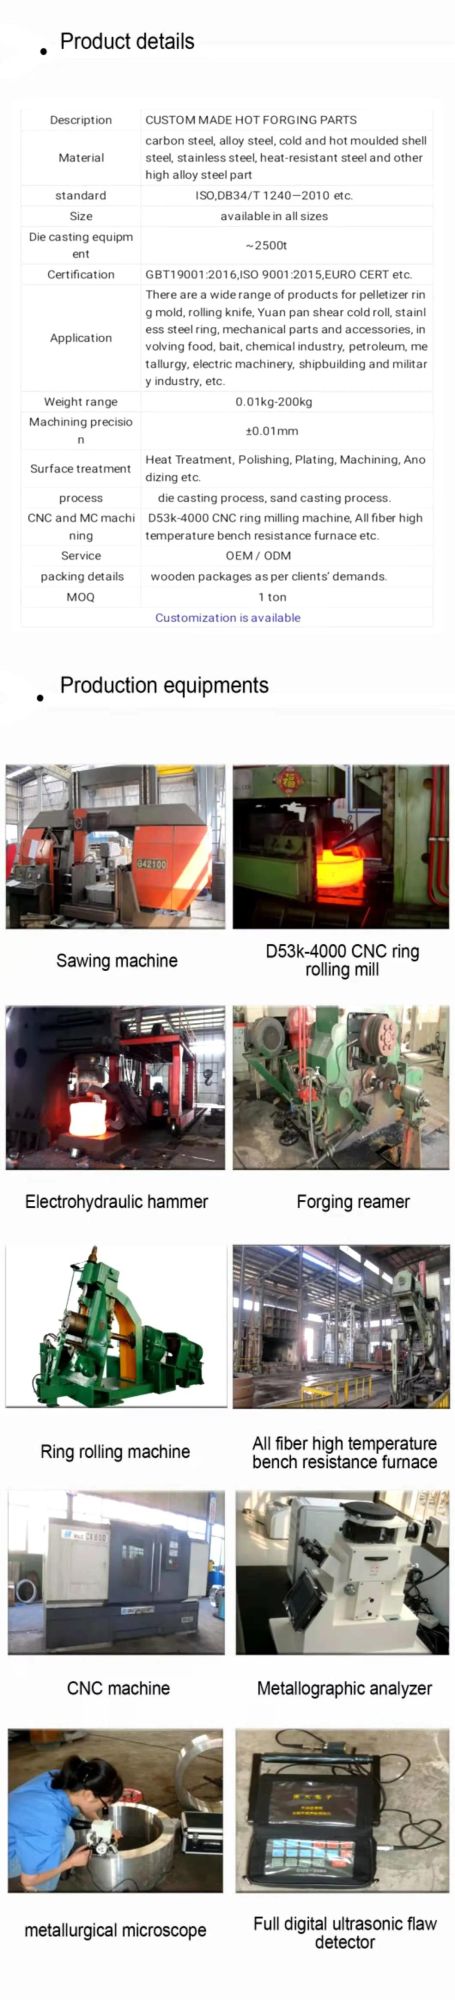 Customized Hot Forging Parts in Automobile and Agricultural Machinery